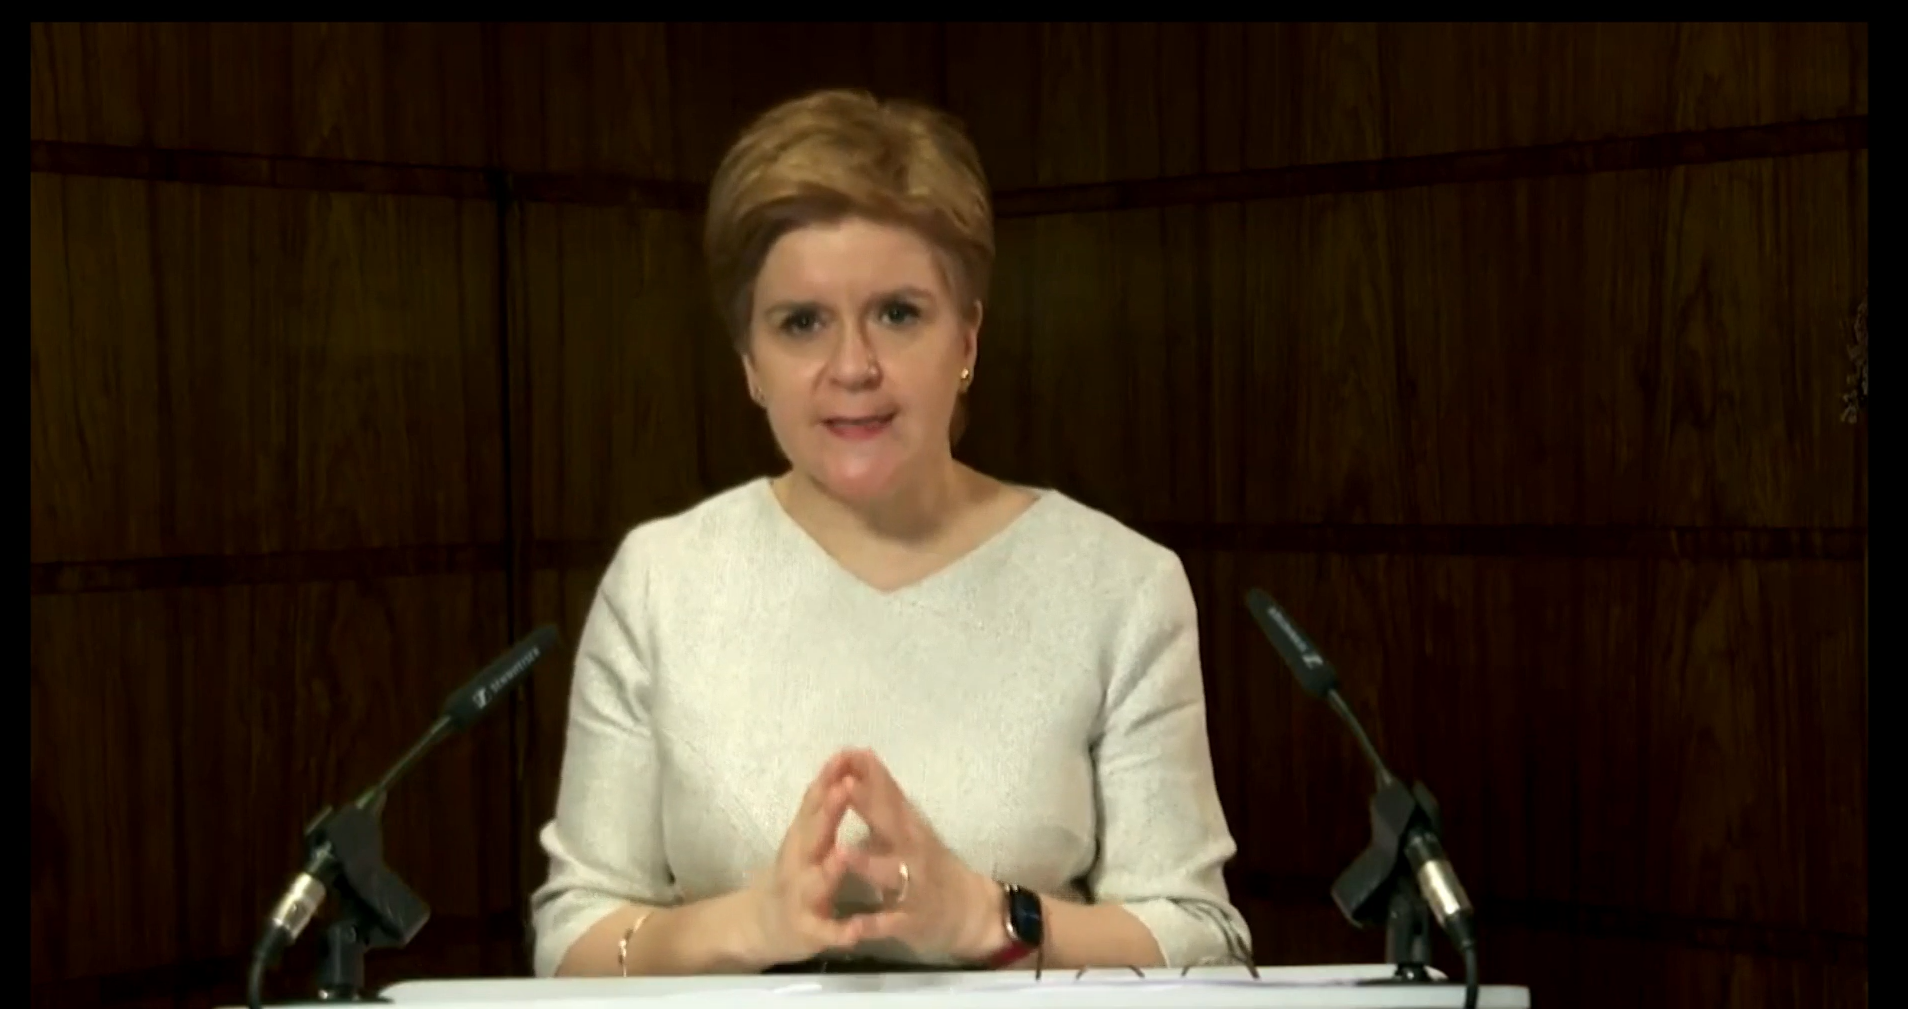 Nicola Sturgeon: "I certainly hope that this time next year we’ll be looking at Covid in the rear view mirror"